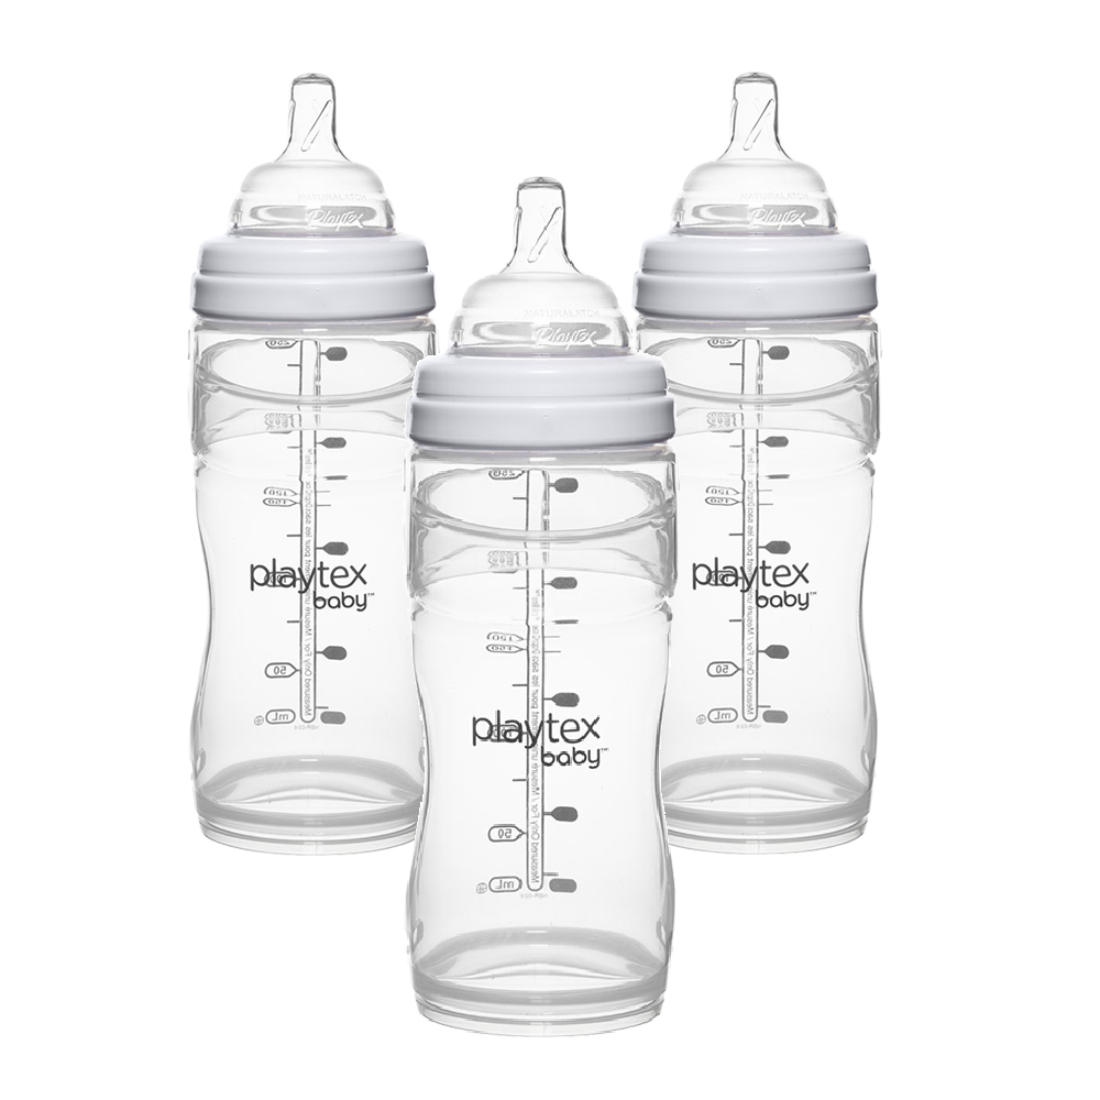 Playtex Baby Nurser with Drop-ins Liners Baby Bottle, 8 oz, 3 pk - image 1 of 13